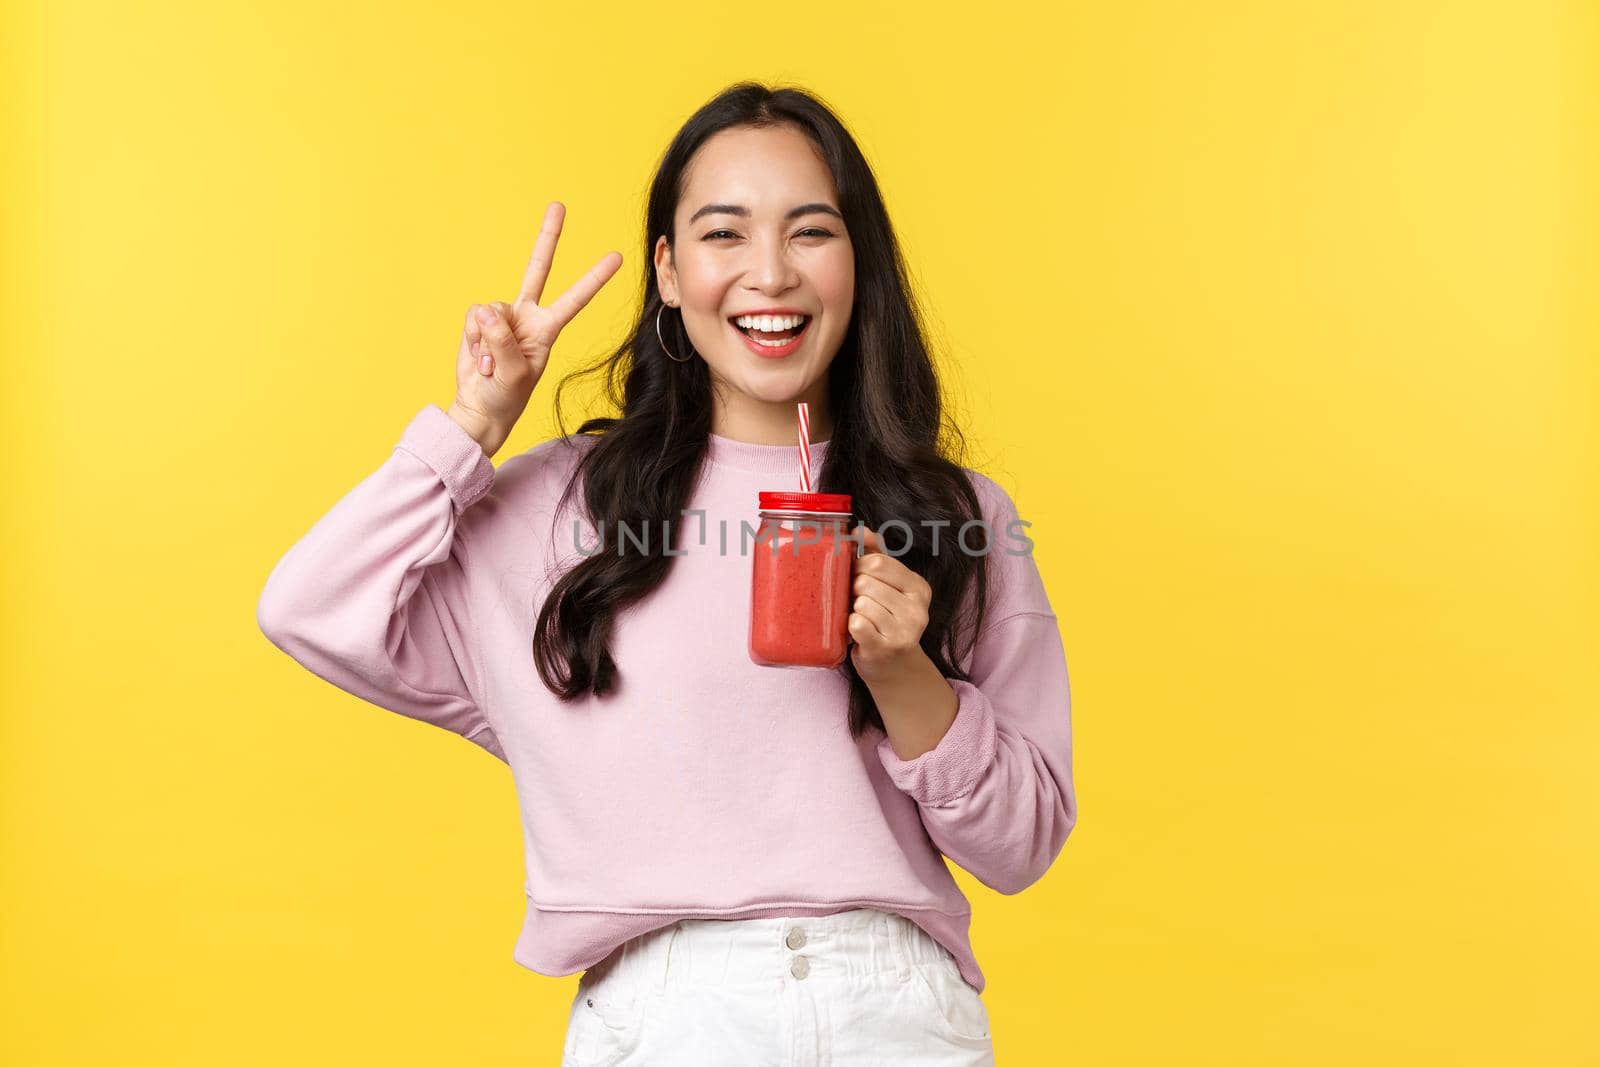 People emotions, lifestyle leisure and beauty concept. Happy upbeat asian 20s girl showing peace sign and smiling delighted as enjoying summer drink, holding smoothie, yellow background.